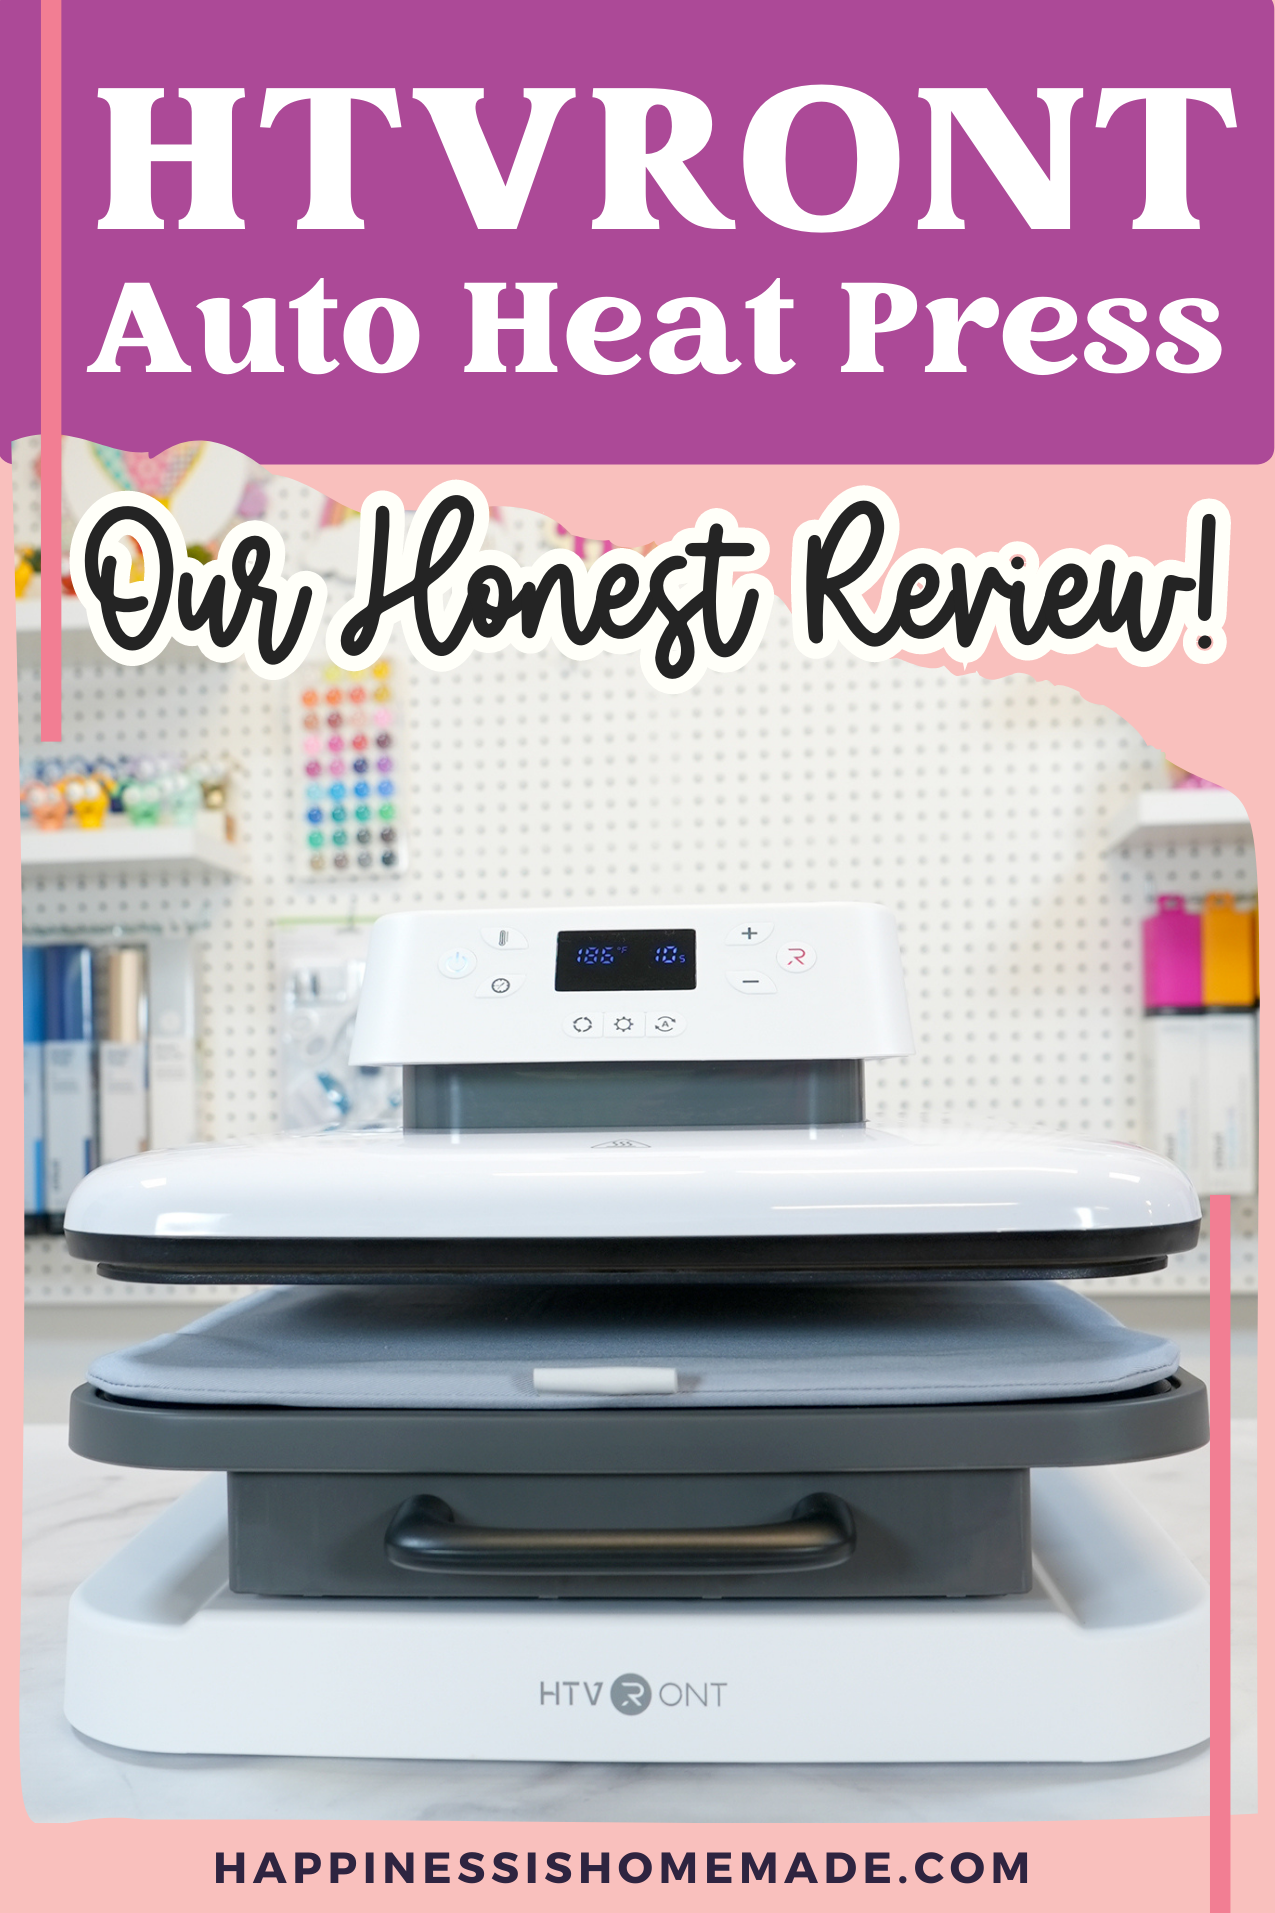 Is it worth it to save up for this heat press? Looking to start a small  clothing brand soon and want to be able to put out pretty clean and vibrant  colors : r/cricut